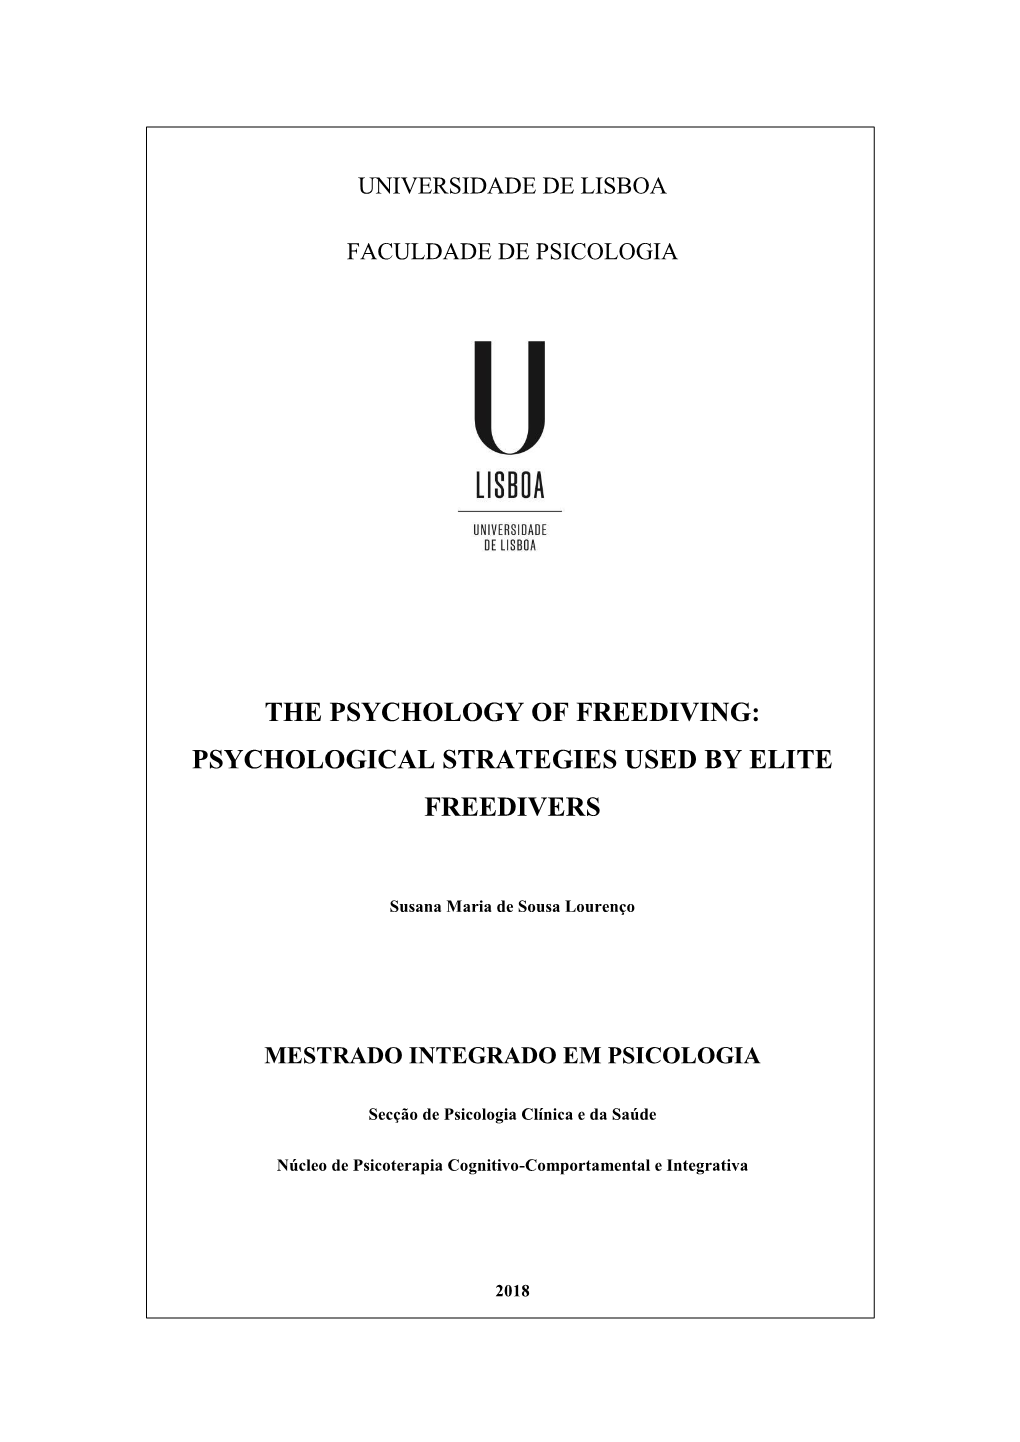 The Psychology of Freediving: Psychological Strategies Used by Elite Freedivers